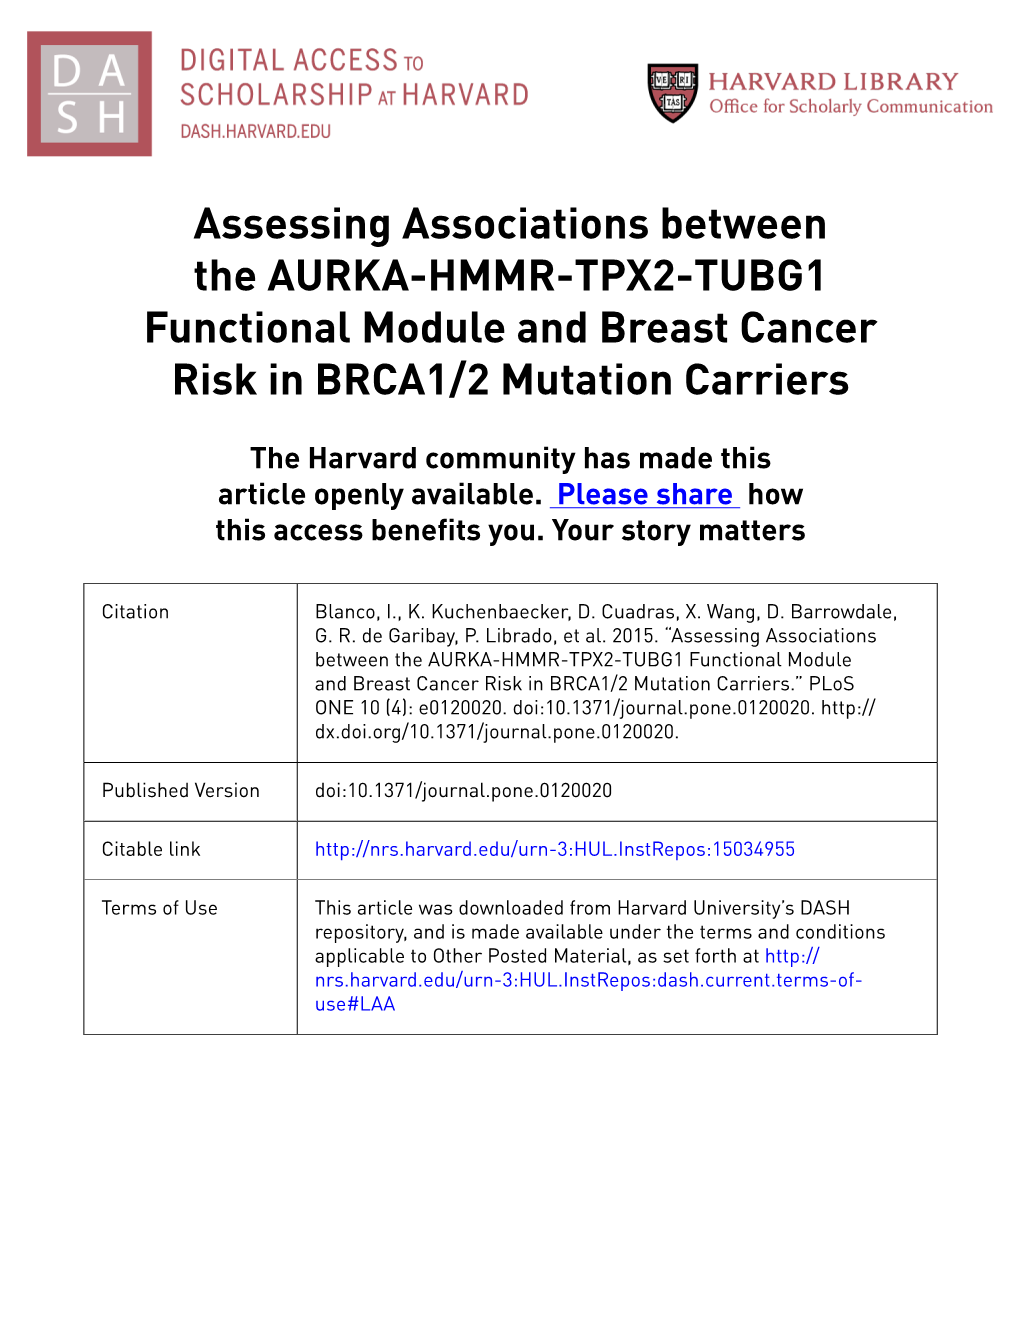 Assessing Associations Between the AURKA-HMMR-TPX2-TUBG1 Functional Module and Breast Cancer Risk in BRCA1/2 Mutation Carriers